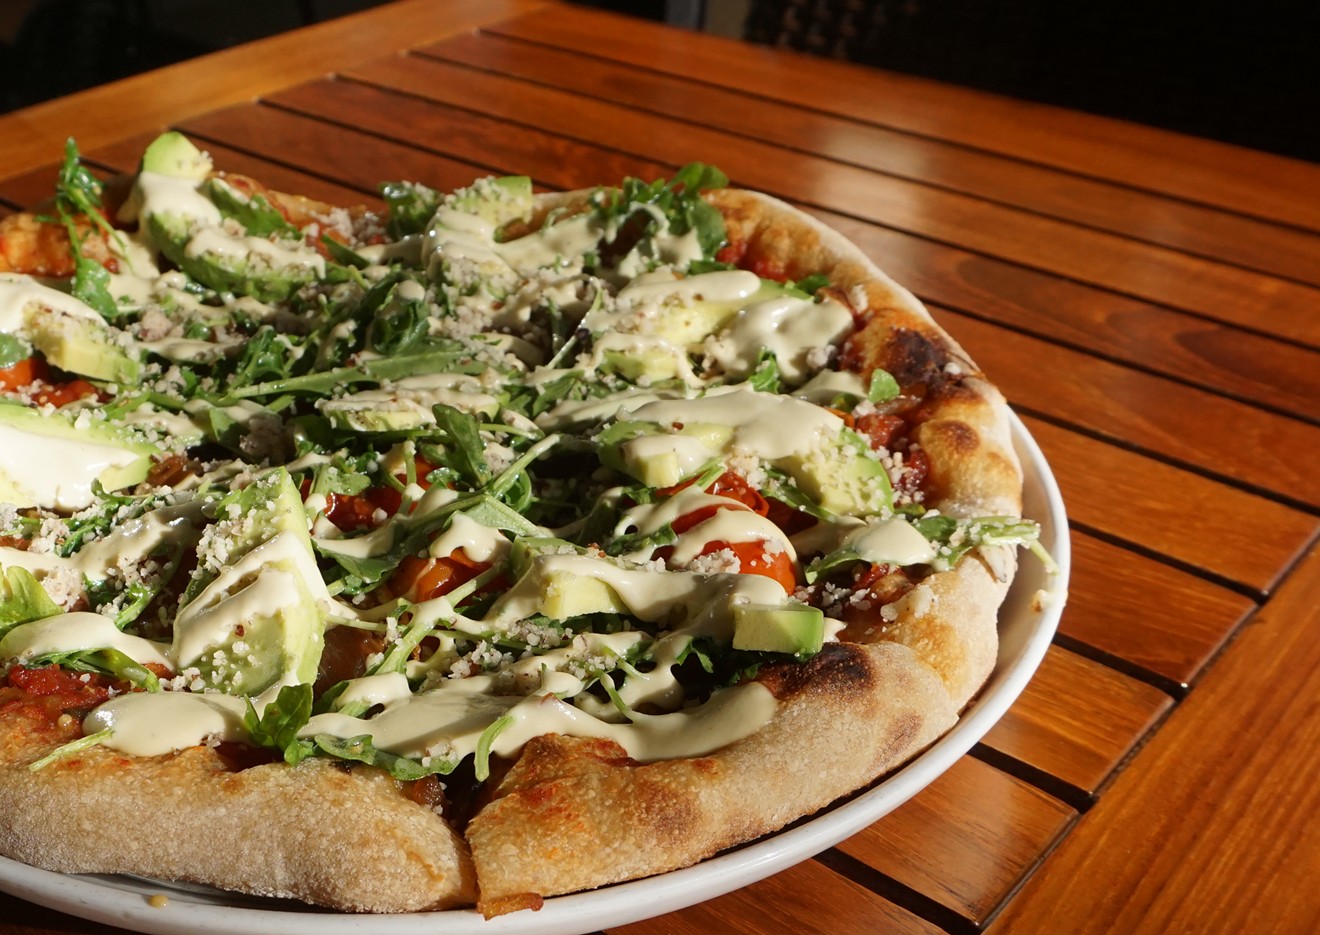 Gourmet avocado pizza at Christopher's Kitchen.